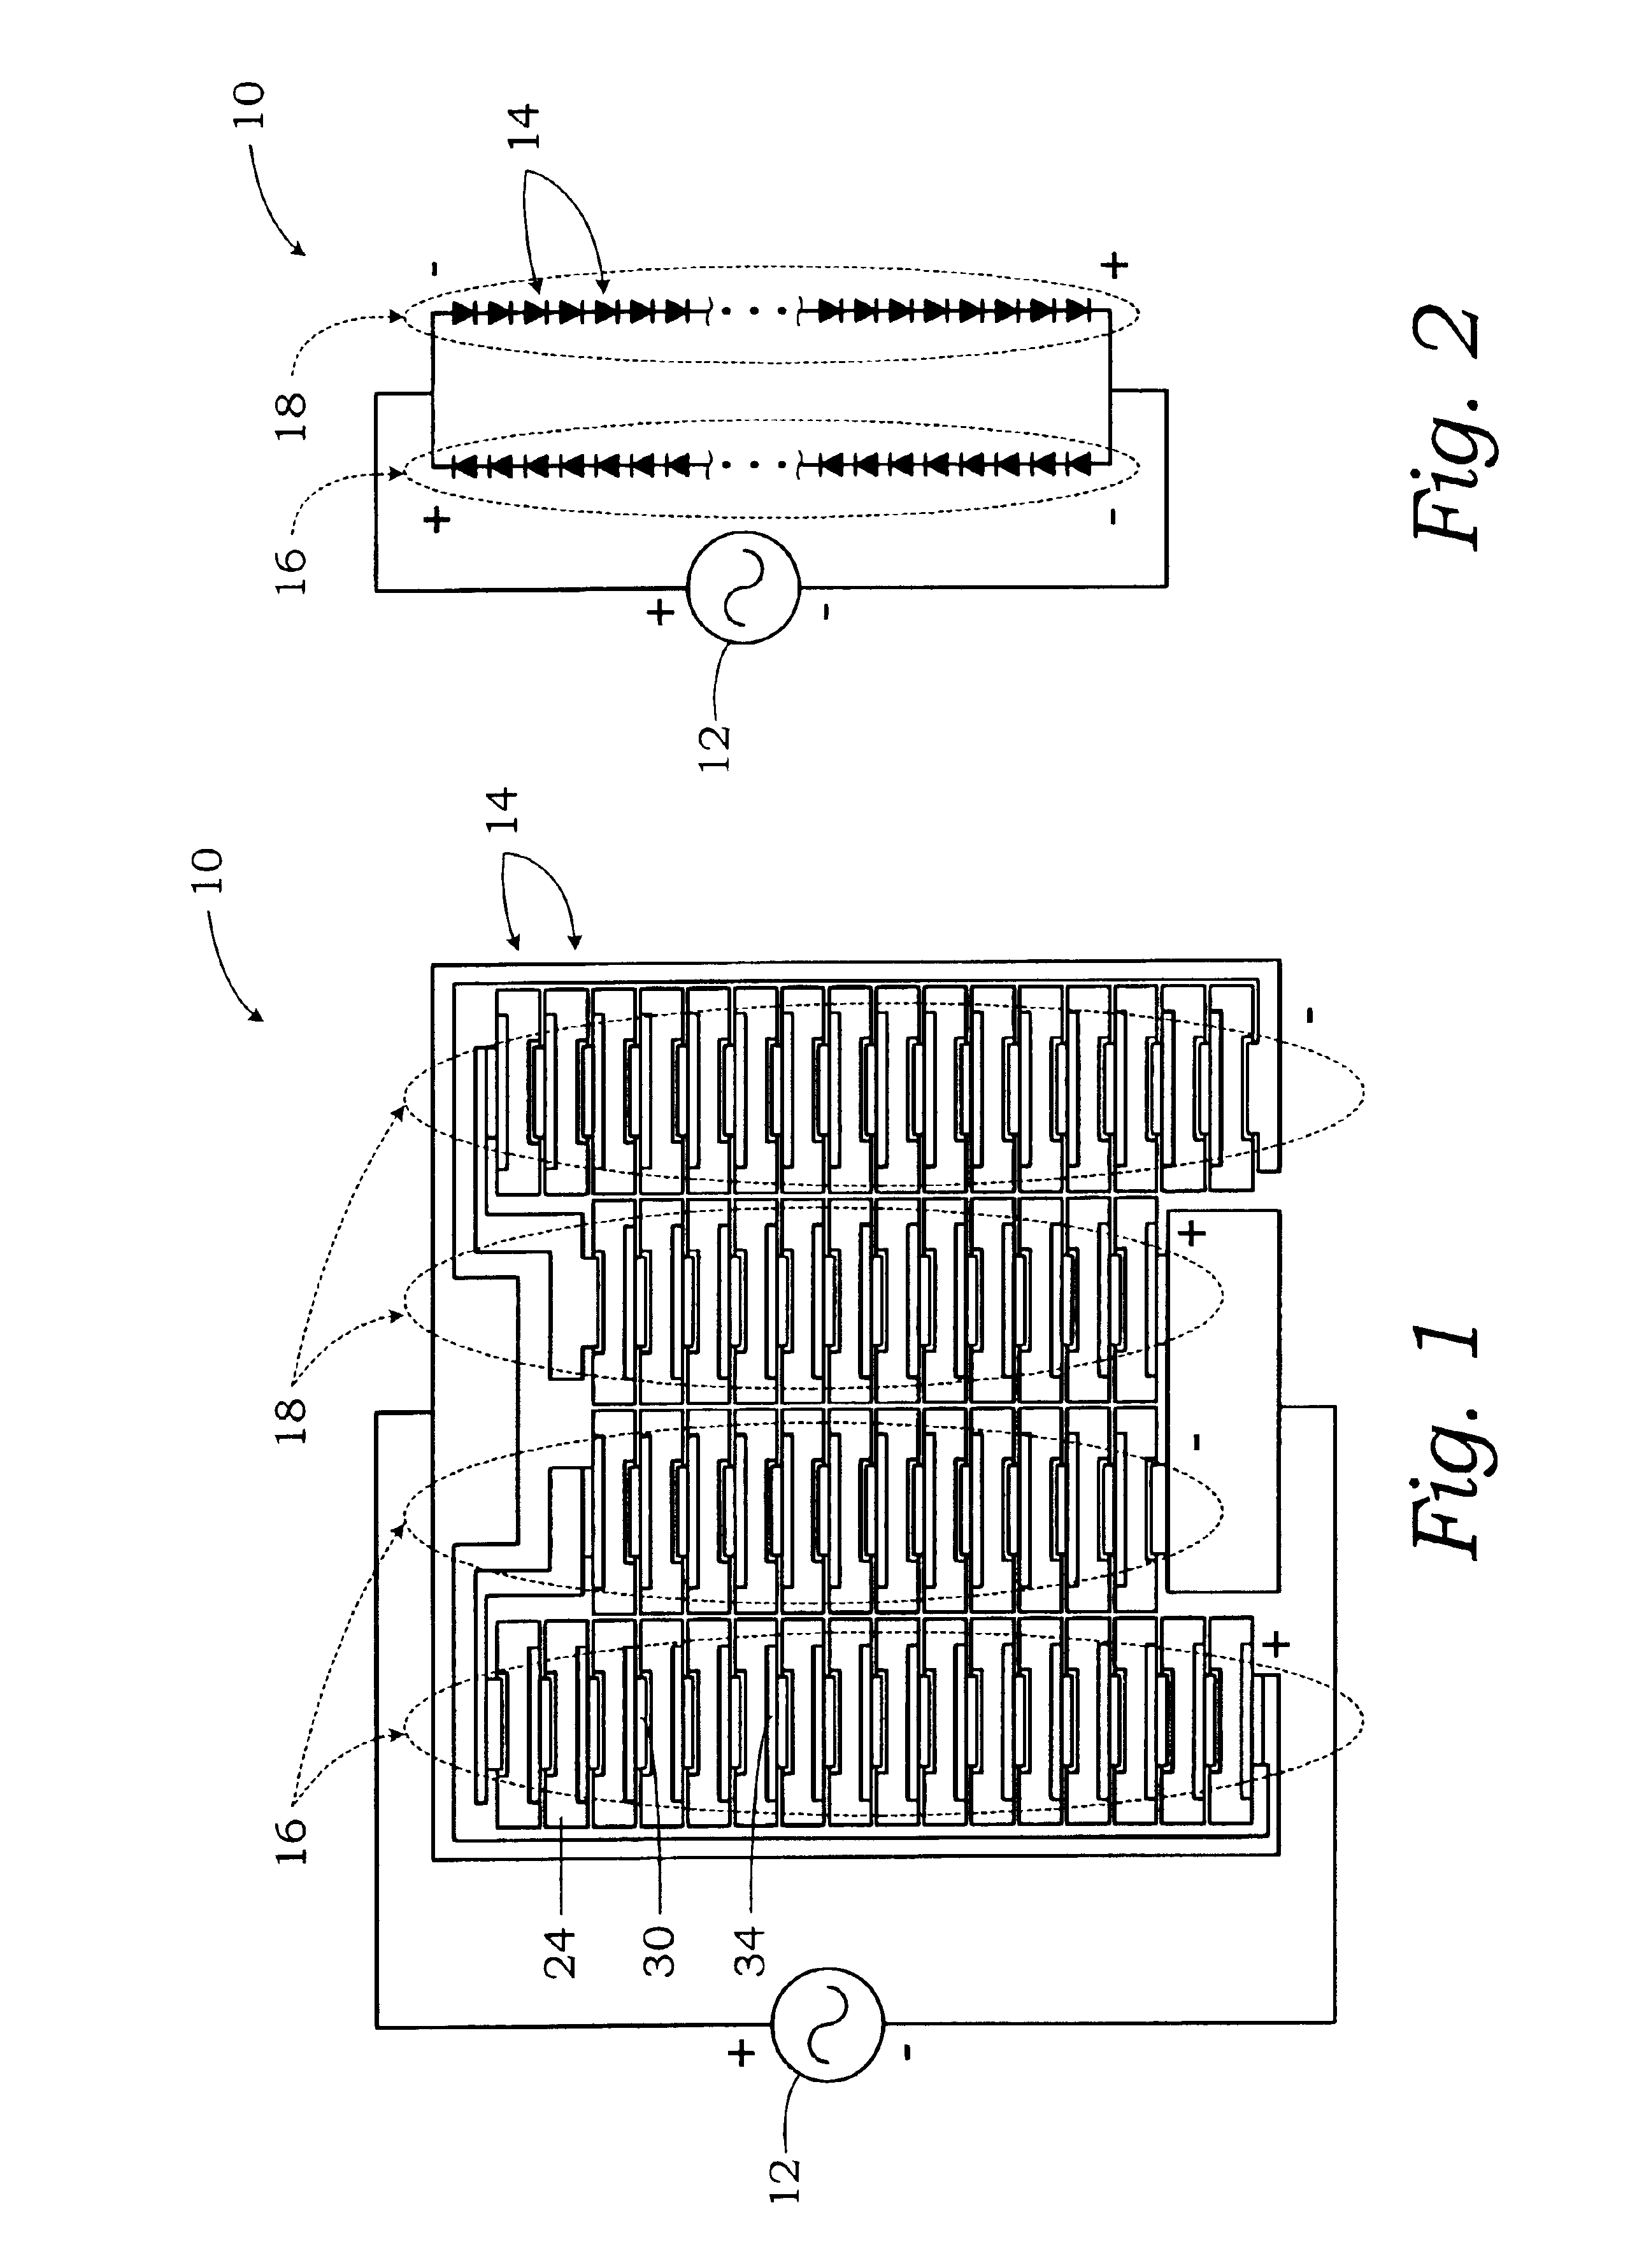 Light emitting diodes for high AC voltage operation and general lighting